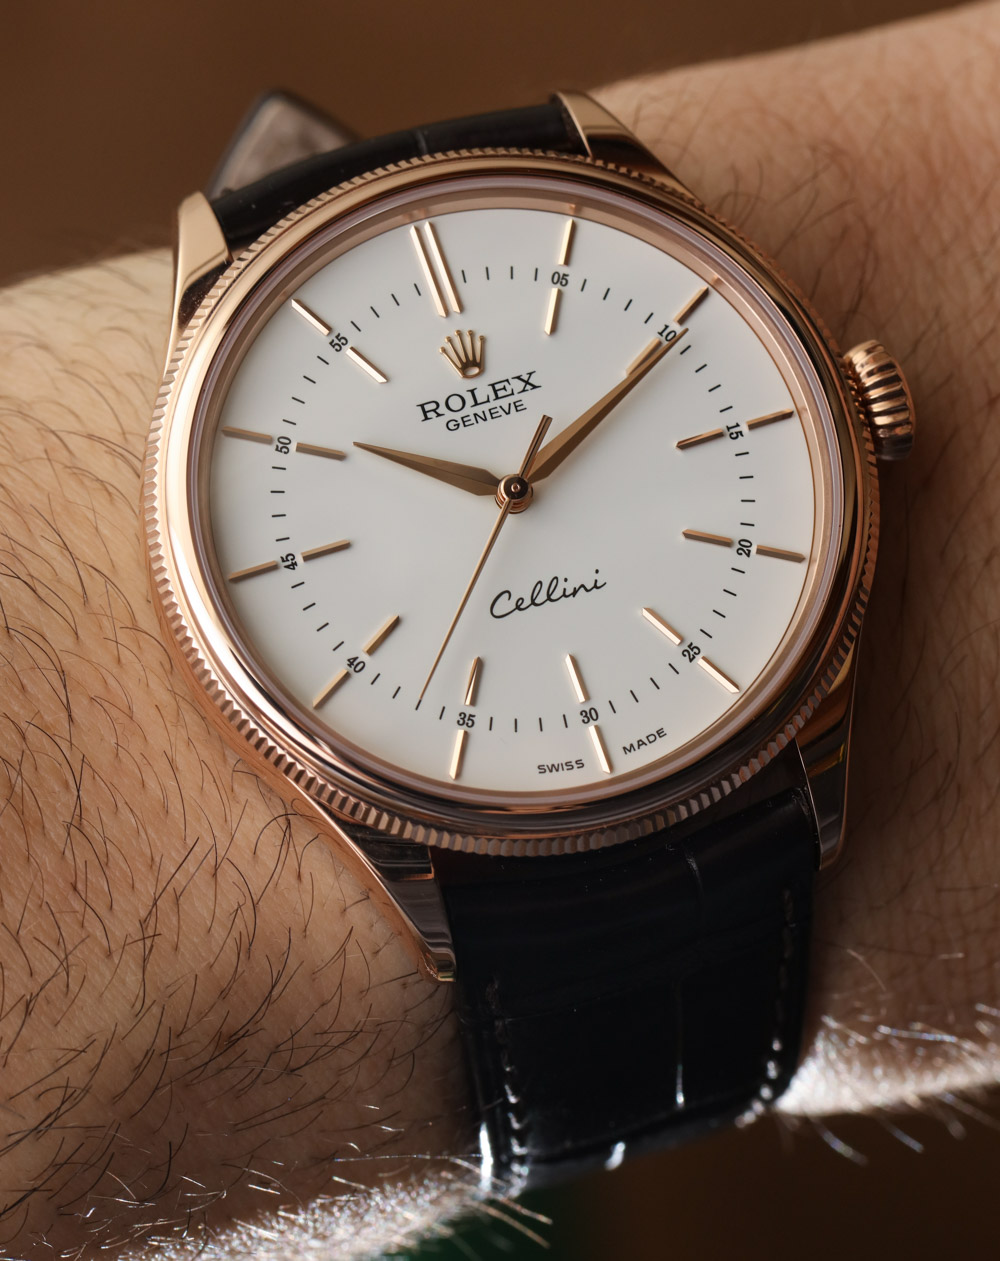 Rolex Cellini Time Replica Watch For 2016 With 'Clean Dial' Hands-On Hands-On 